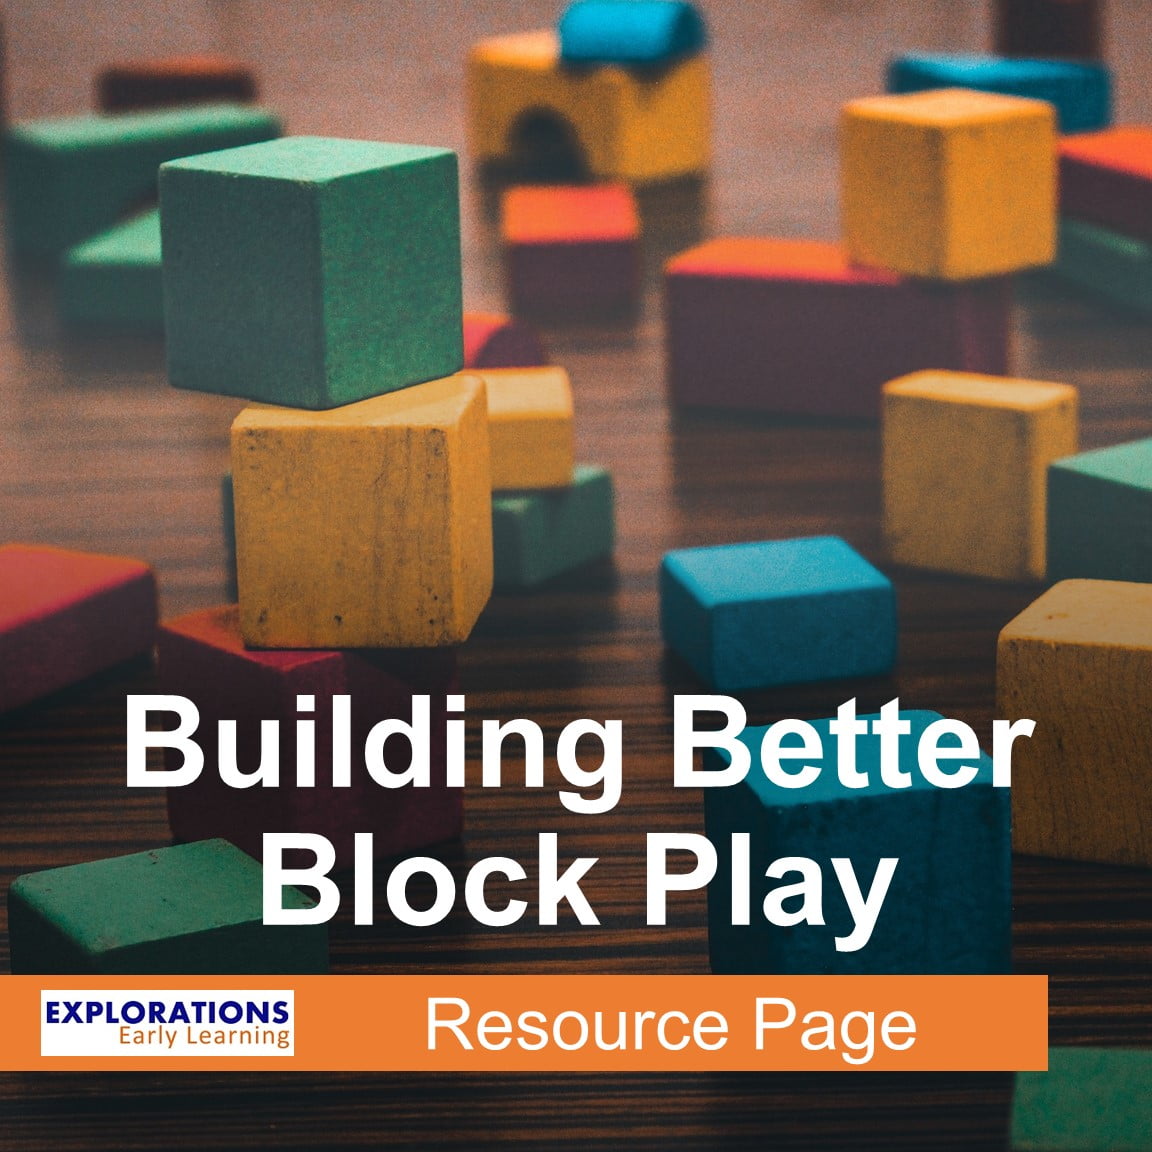 Building Better Block Play | Resource Page